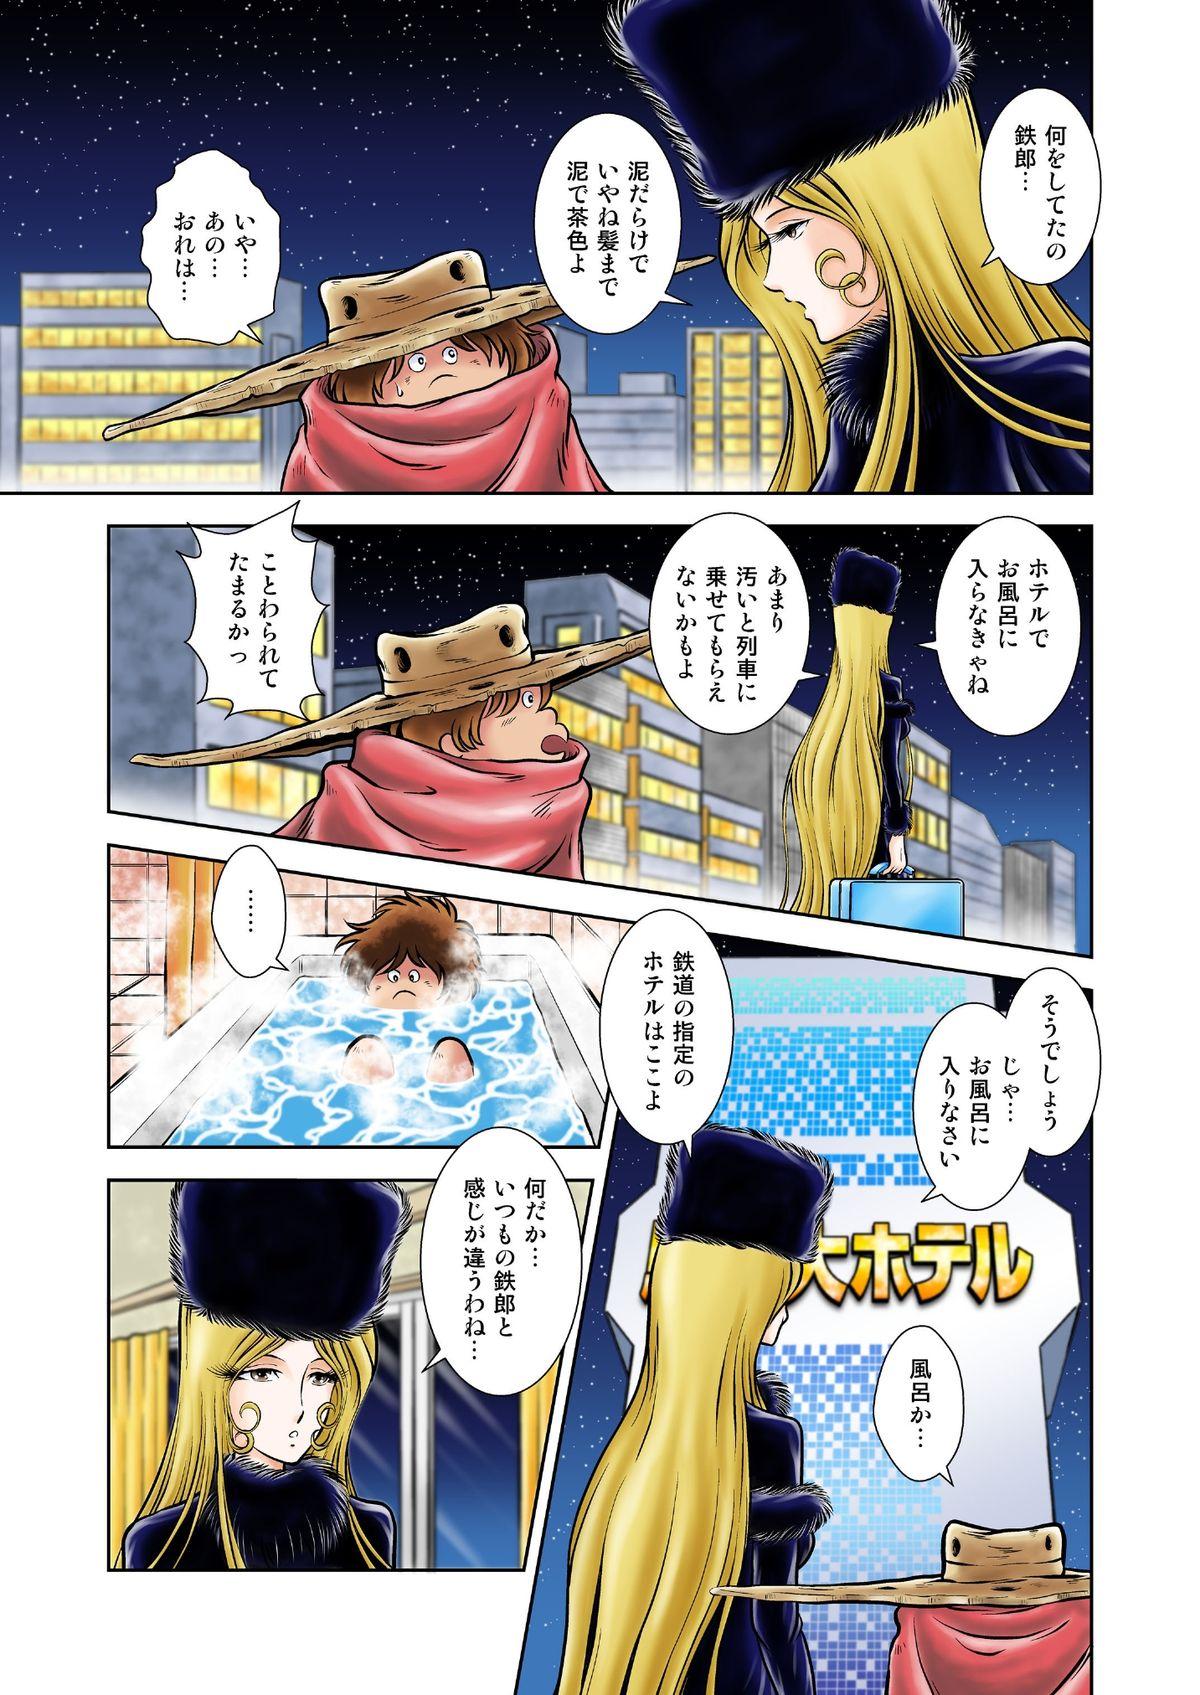 Butt Plug Maetel Story 15 - Galaxy express 999 Indian Sex - Page 5